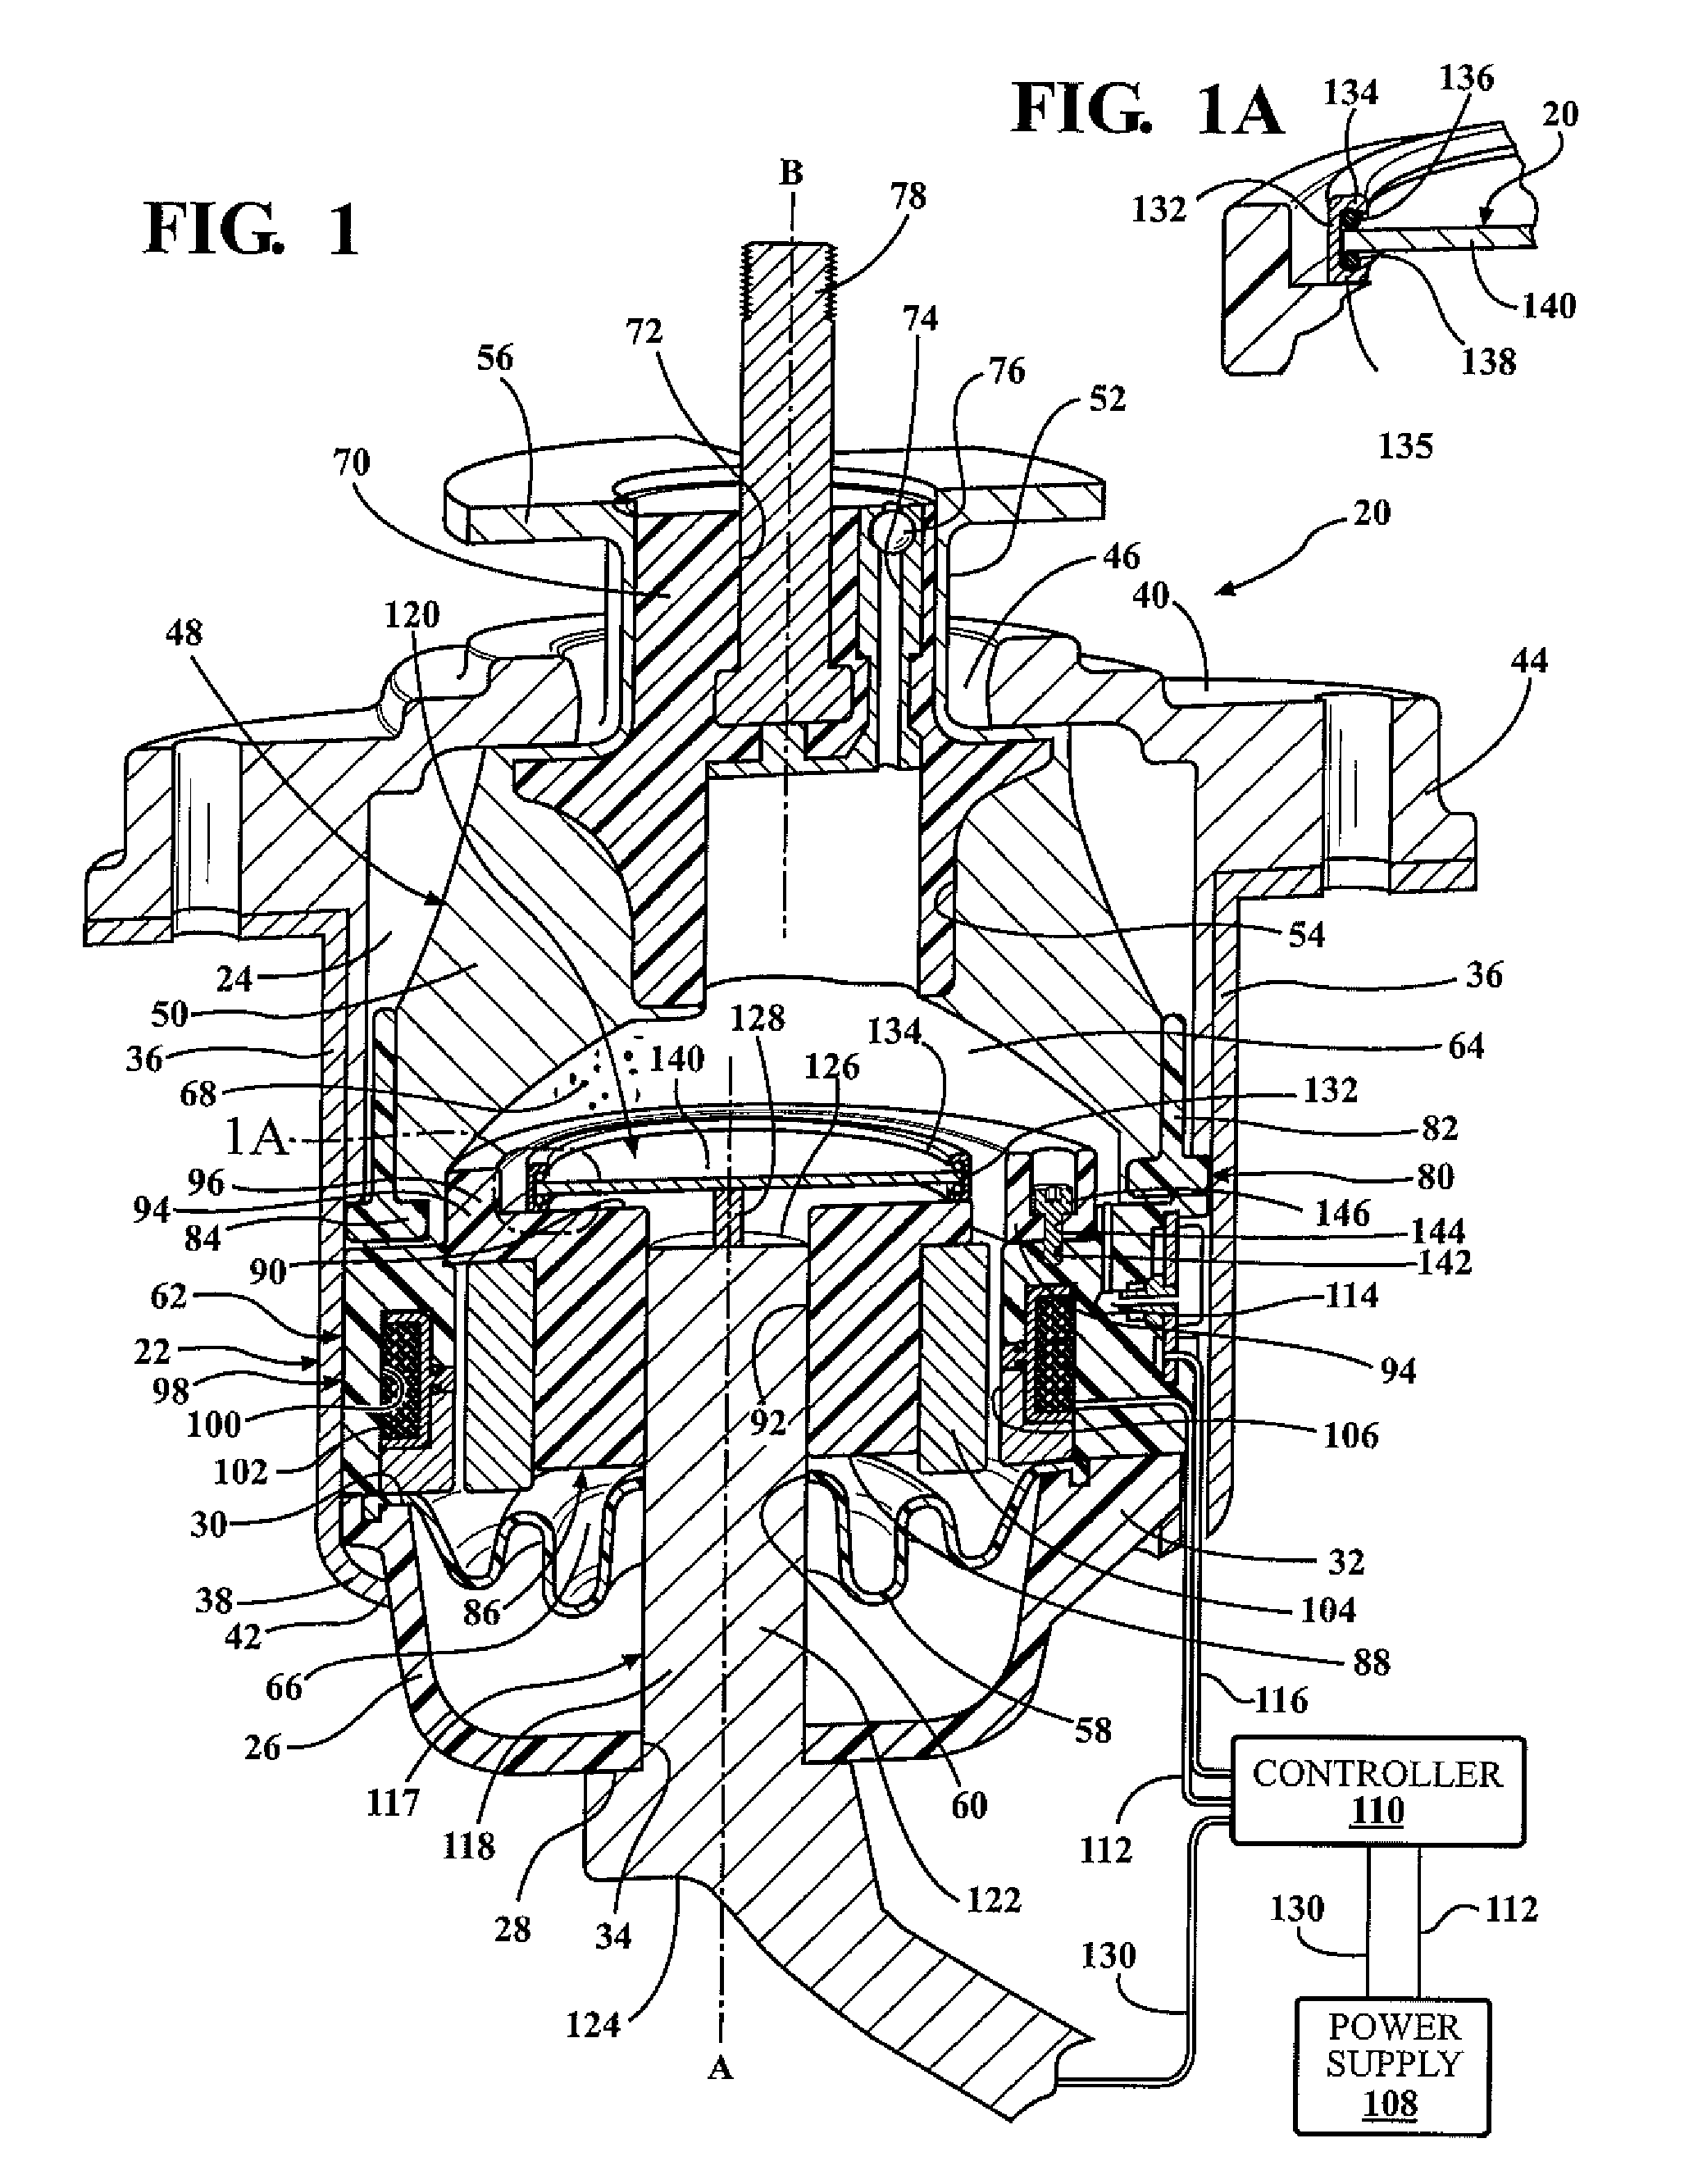 Hydraulic mount apparatus for supporting vibration source